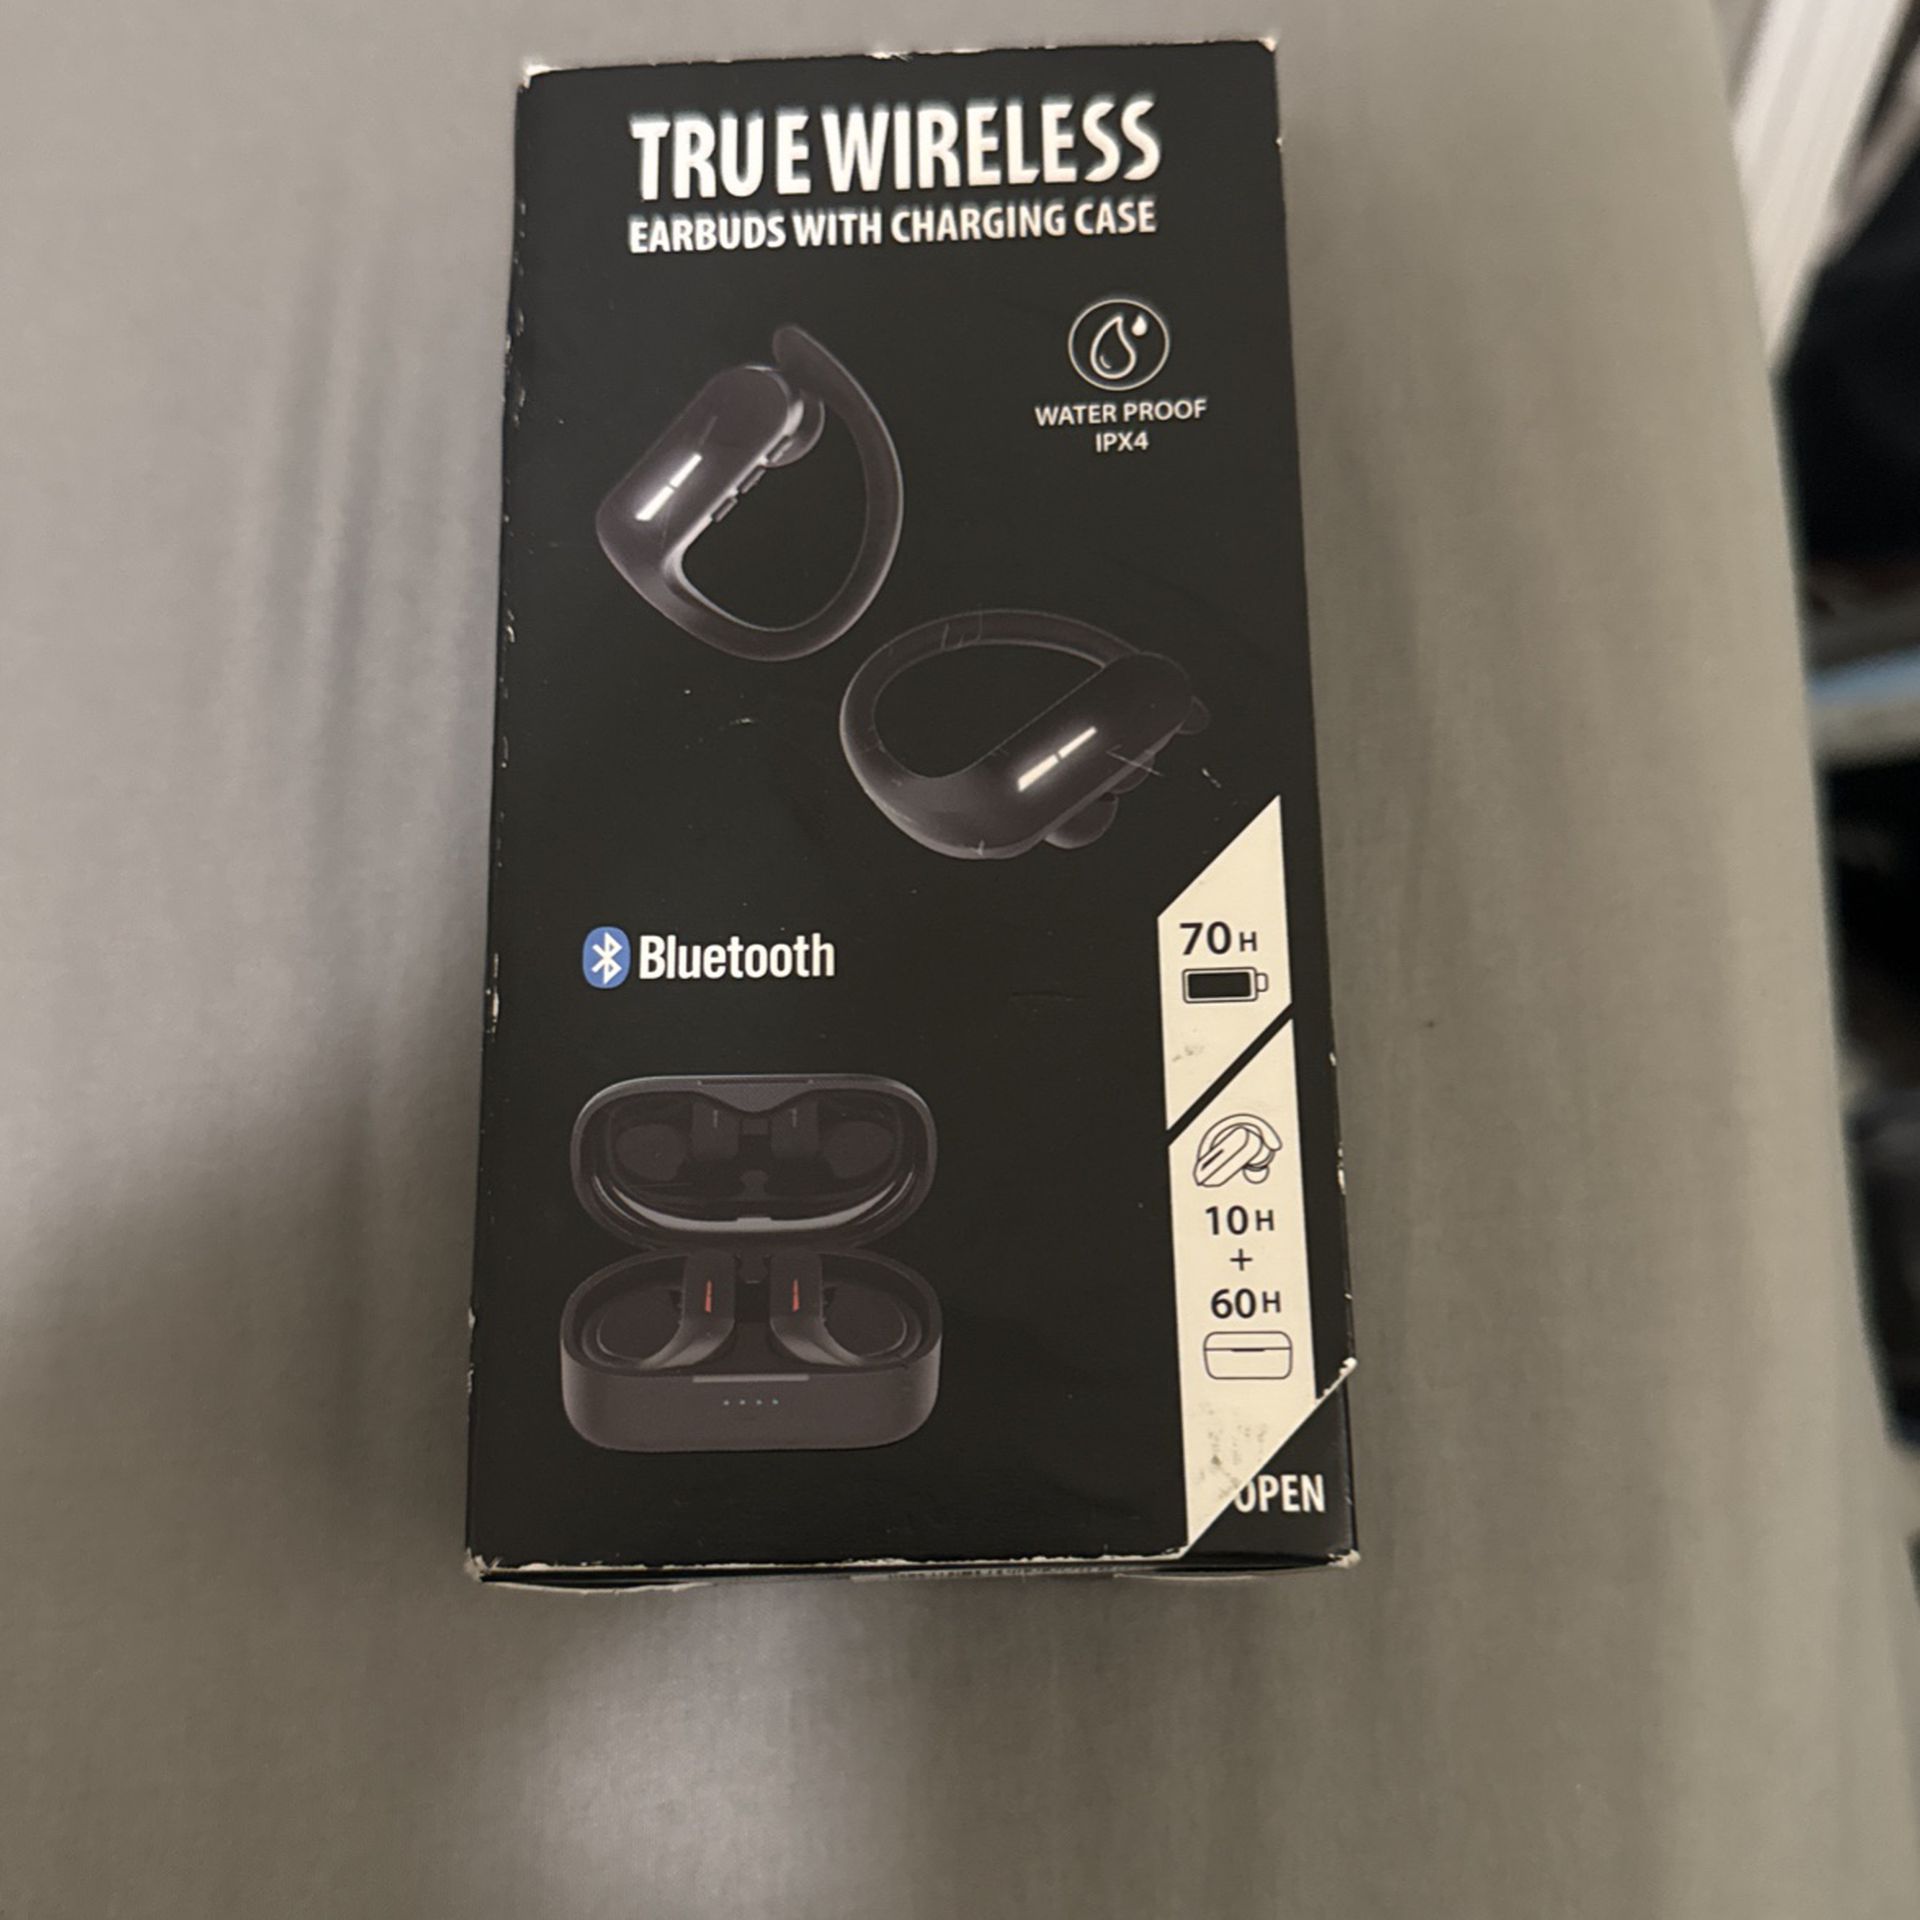 True Wireless Earbuds With Charging Case